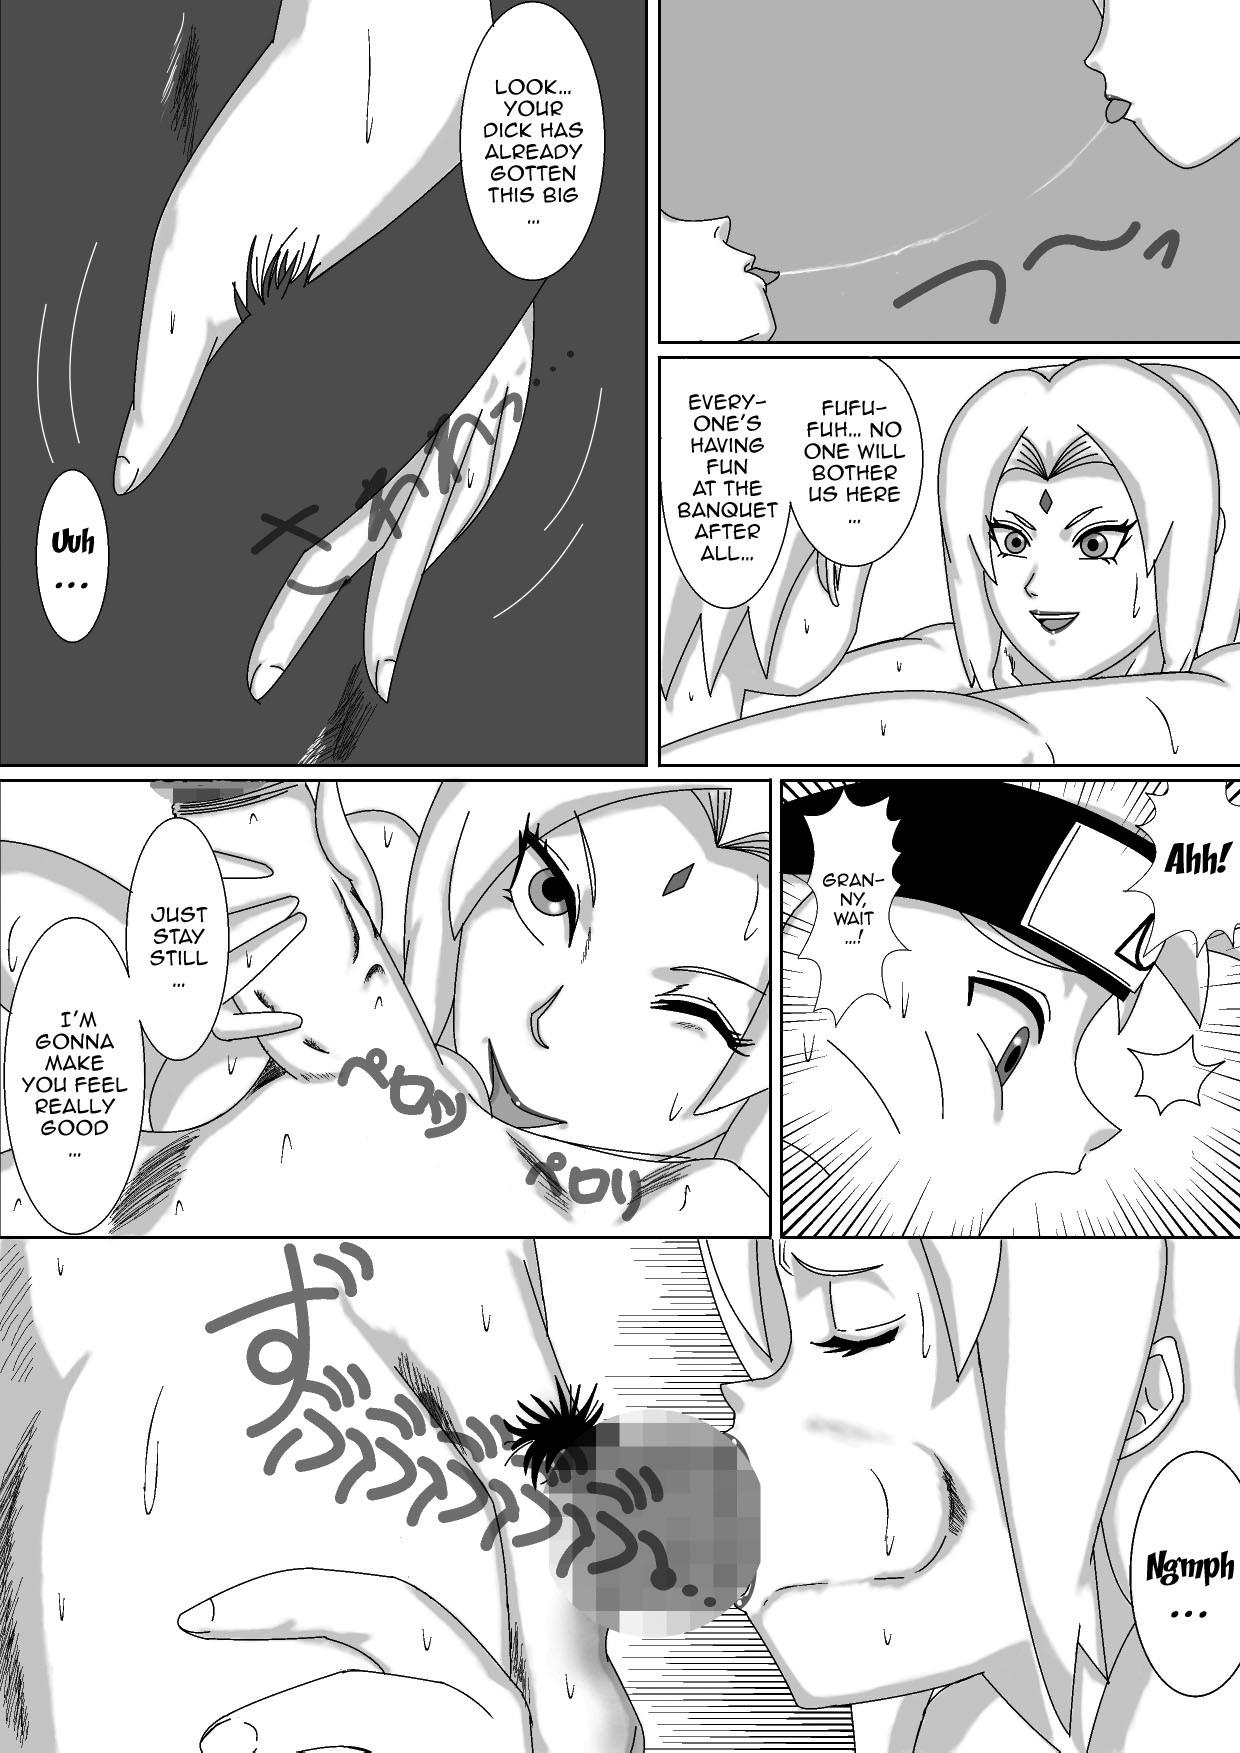 Dando Nomisugite Deisui Shita BBA to Yarimakutta Ken!! | The Case Of Having Sex With This Old Lady After She Got Herself Really Drunk - Naruto Threeway - Page 7